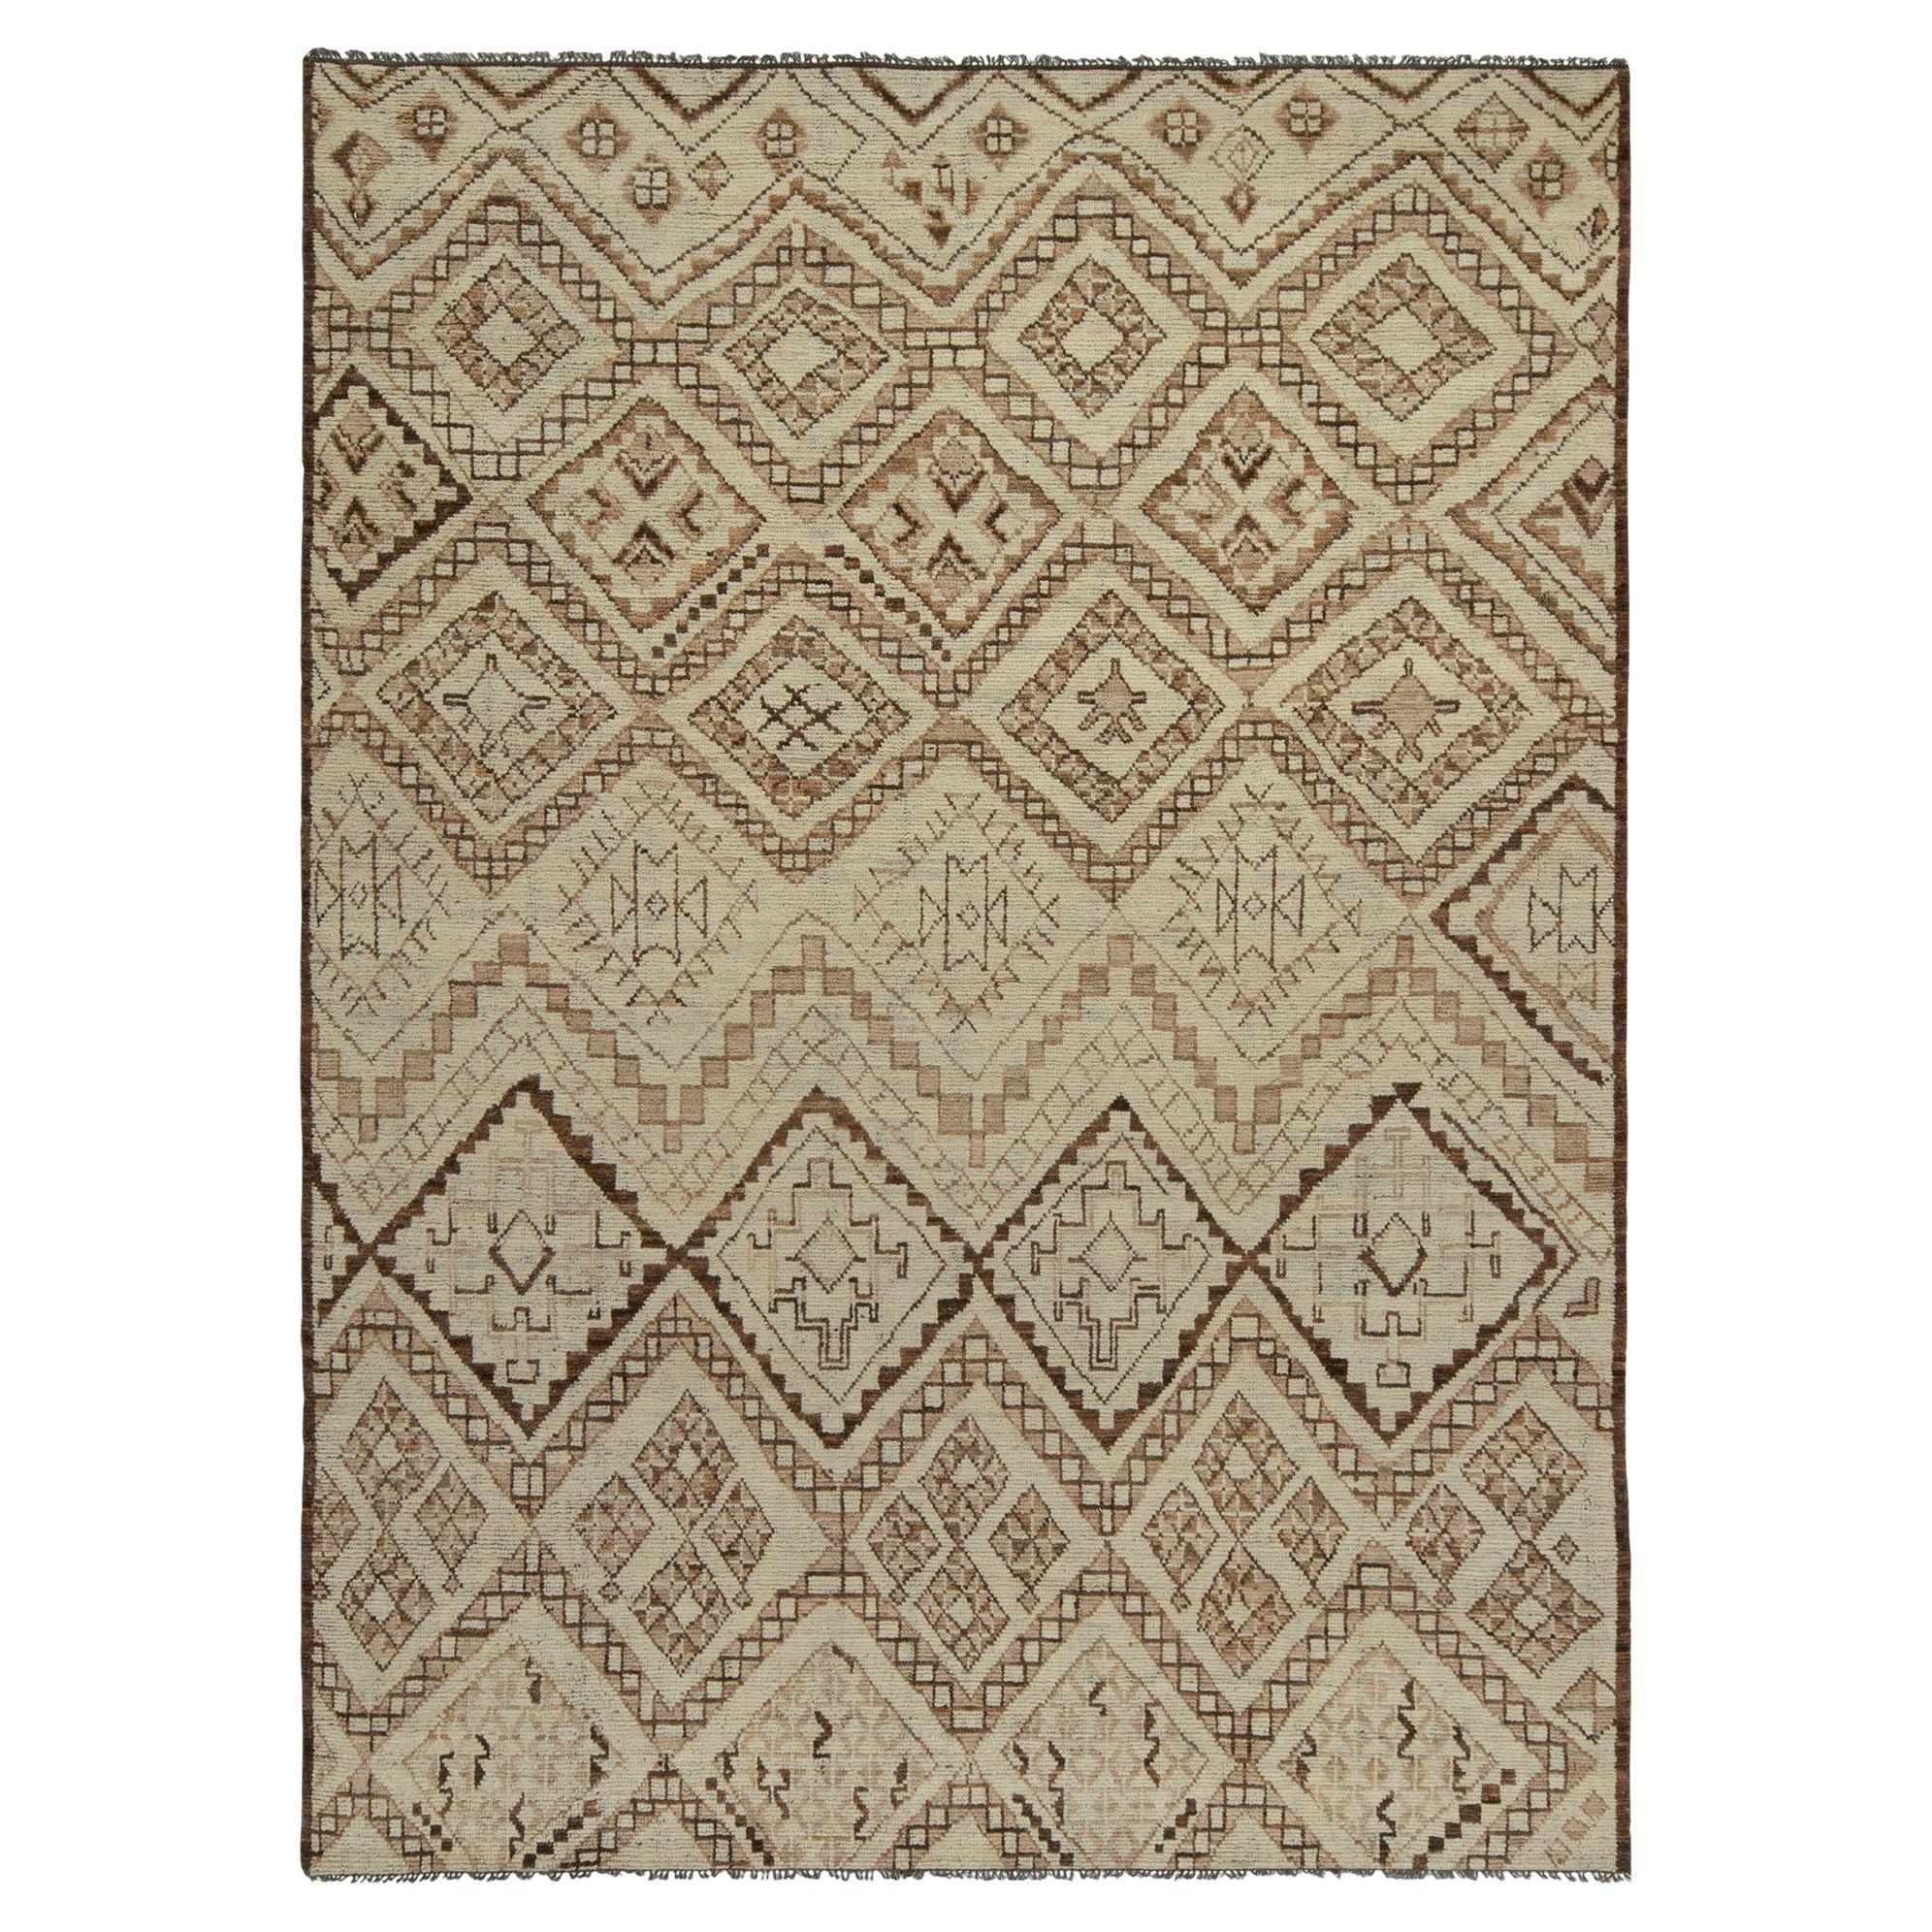 Rug & Kilim’s Moroccan Style Rug in Beige-Brown Tribal Geometric Patterns For Sale